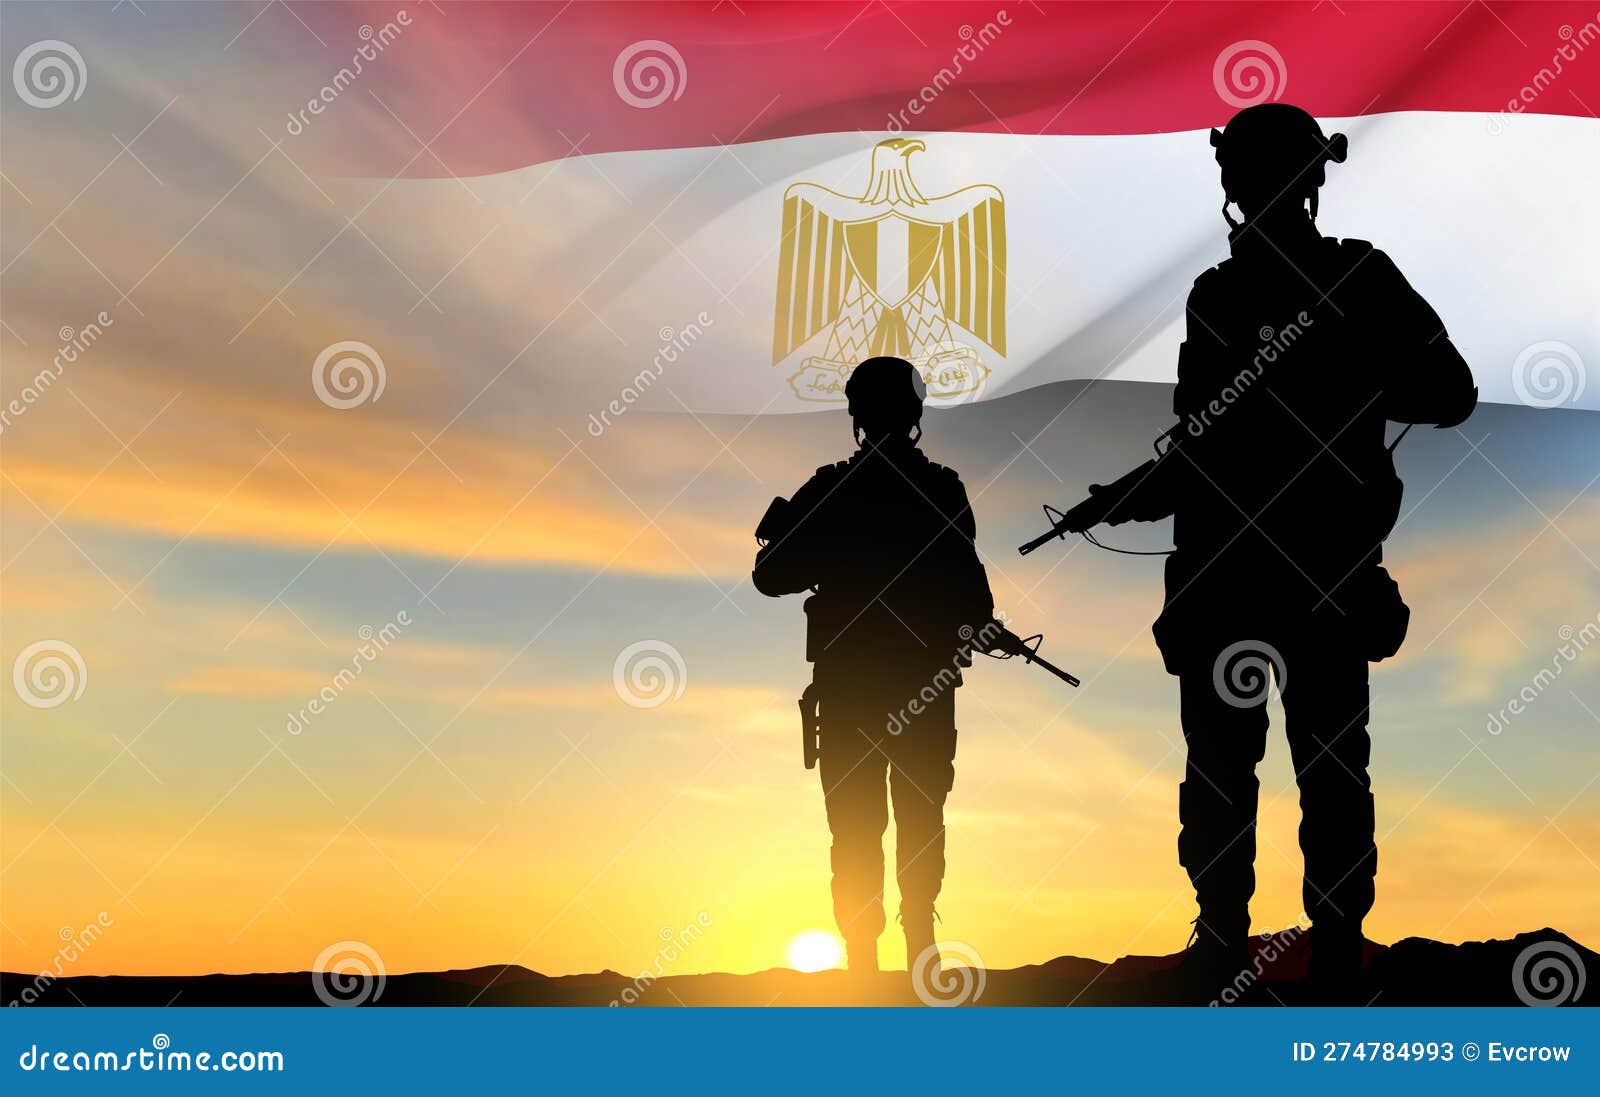 Silhouettes of Soldiers Against the Sunset with Egypt Flag Stock Vector ...